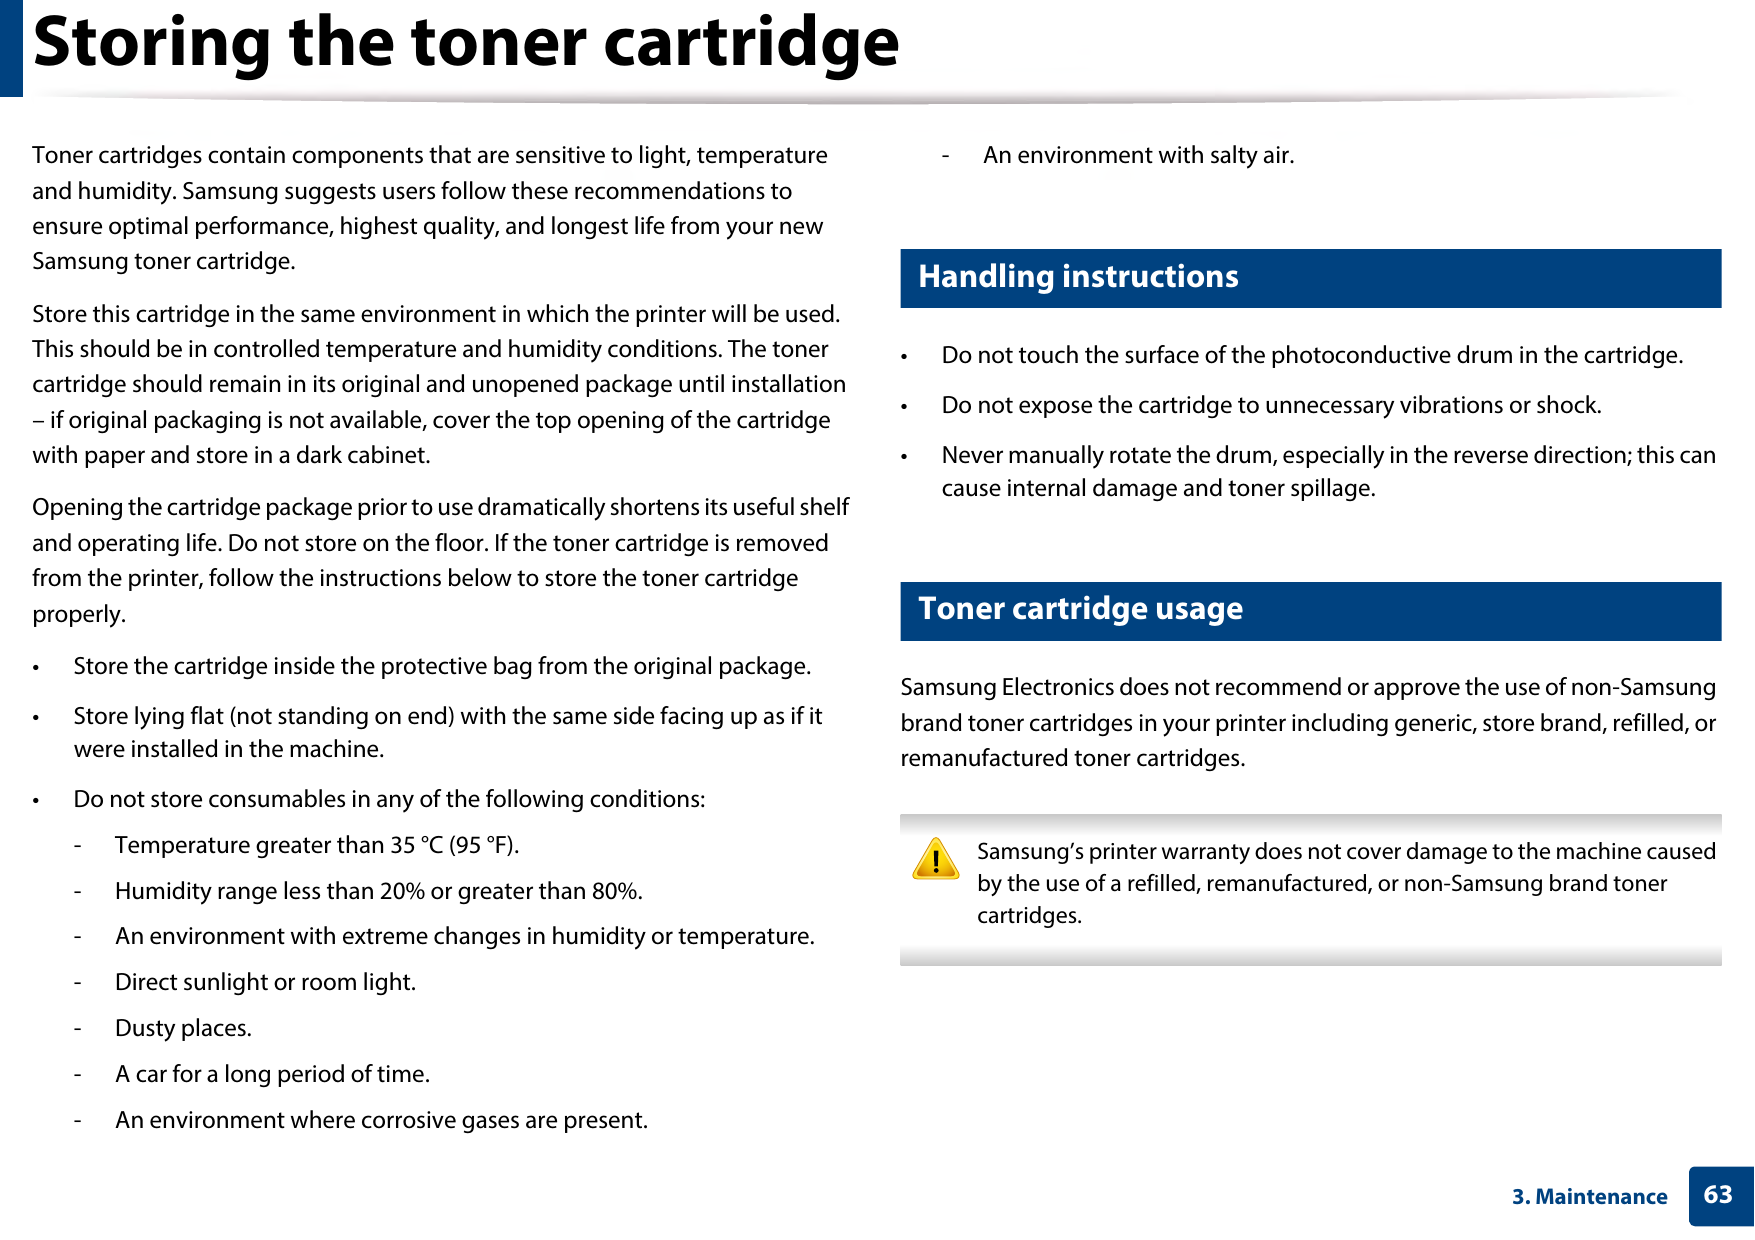 633. MaintenanceStoring the toner cartridgeToner cartridges contain components that are sensitive to light, temperature and humidity. Samsung suggests users follow these recommendations to ensure optimal performance, highest quality, and longest life from your new Samsung toner cartridge.Store this cartridge in the same environment in which the printer will be used. This should be in controlled temperature and humidity conditions. The toner cartridge should remain in its original and unopened package until installation – if original packaging is not available, cover the top opening of the cartridge with paper and store in a dark cabinet.Opening the cartridge package prior to use dramatically shortens its useful shelf and operating life. Do not store on the floor. If the toner cartridge is removed from the printer, follow the instructions below to store the toner cartridge properly.• Store the cartridge inside the protective bag from the original package. • Store lying flat (not standing on end) with the same side facing up as if it were installed in the machine.• Do not store consumables in any of the following conditions:- Temperature greater than 35 °C (95 °F).- Humidity range less than 20% or greater than 80%.- An environment with extreme changes in humidity or temperature.- Direct sunlight or room light.- Dusty places.- A car for a long period of time.- An environment where corrosive gases are present.- An environment with salty air.1 Handling instructions• Do not touch the surface of the photoconductive drum in the cartridge.• Do not expose the cartridge to unnecessary vibrations or shock.• Never manually rotate the drum, especially in the reverse direction; this can cause internal damage and toner spillage.2 Toner cartridge usageSamsung Electronics does not recommend or approve the use of non-Samsung brand toner cartridges in your printer including generic, store brand, refilled, or remanufactured toner cartridges. Samsung’s printer warranty does not cover damage to the machine caused by the use of a refilled, remanufactured, or non-Samsung brand toner cartridges. 